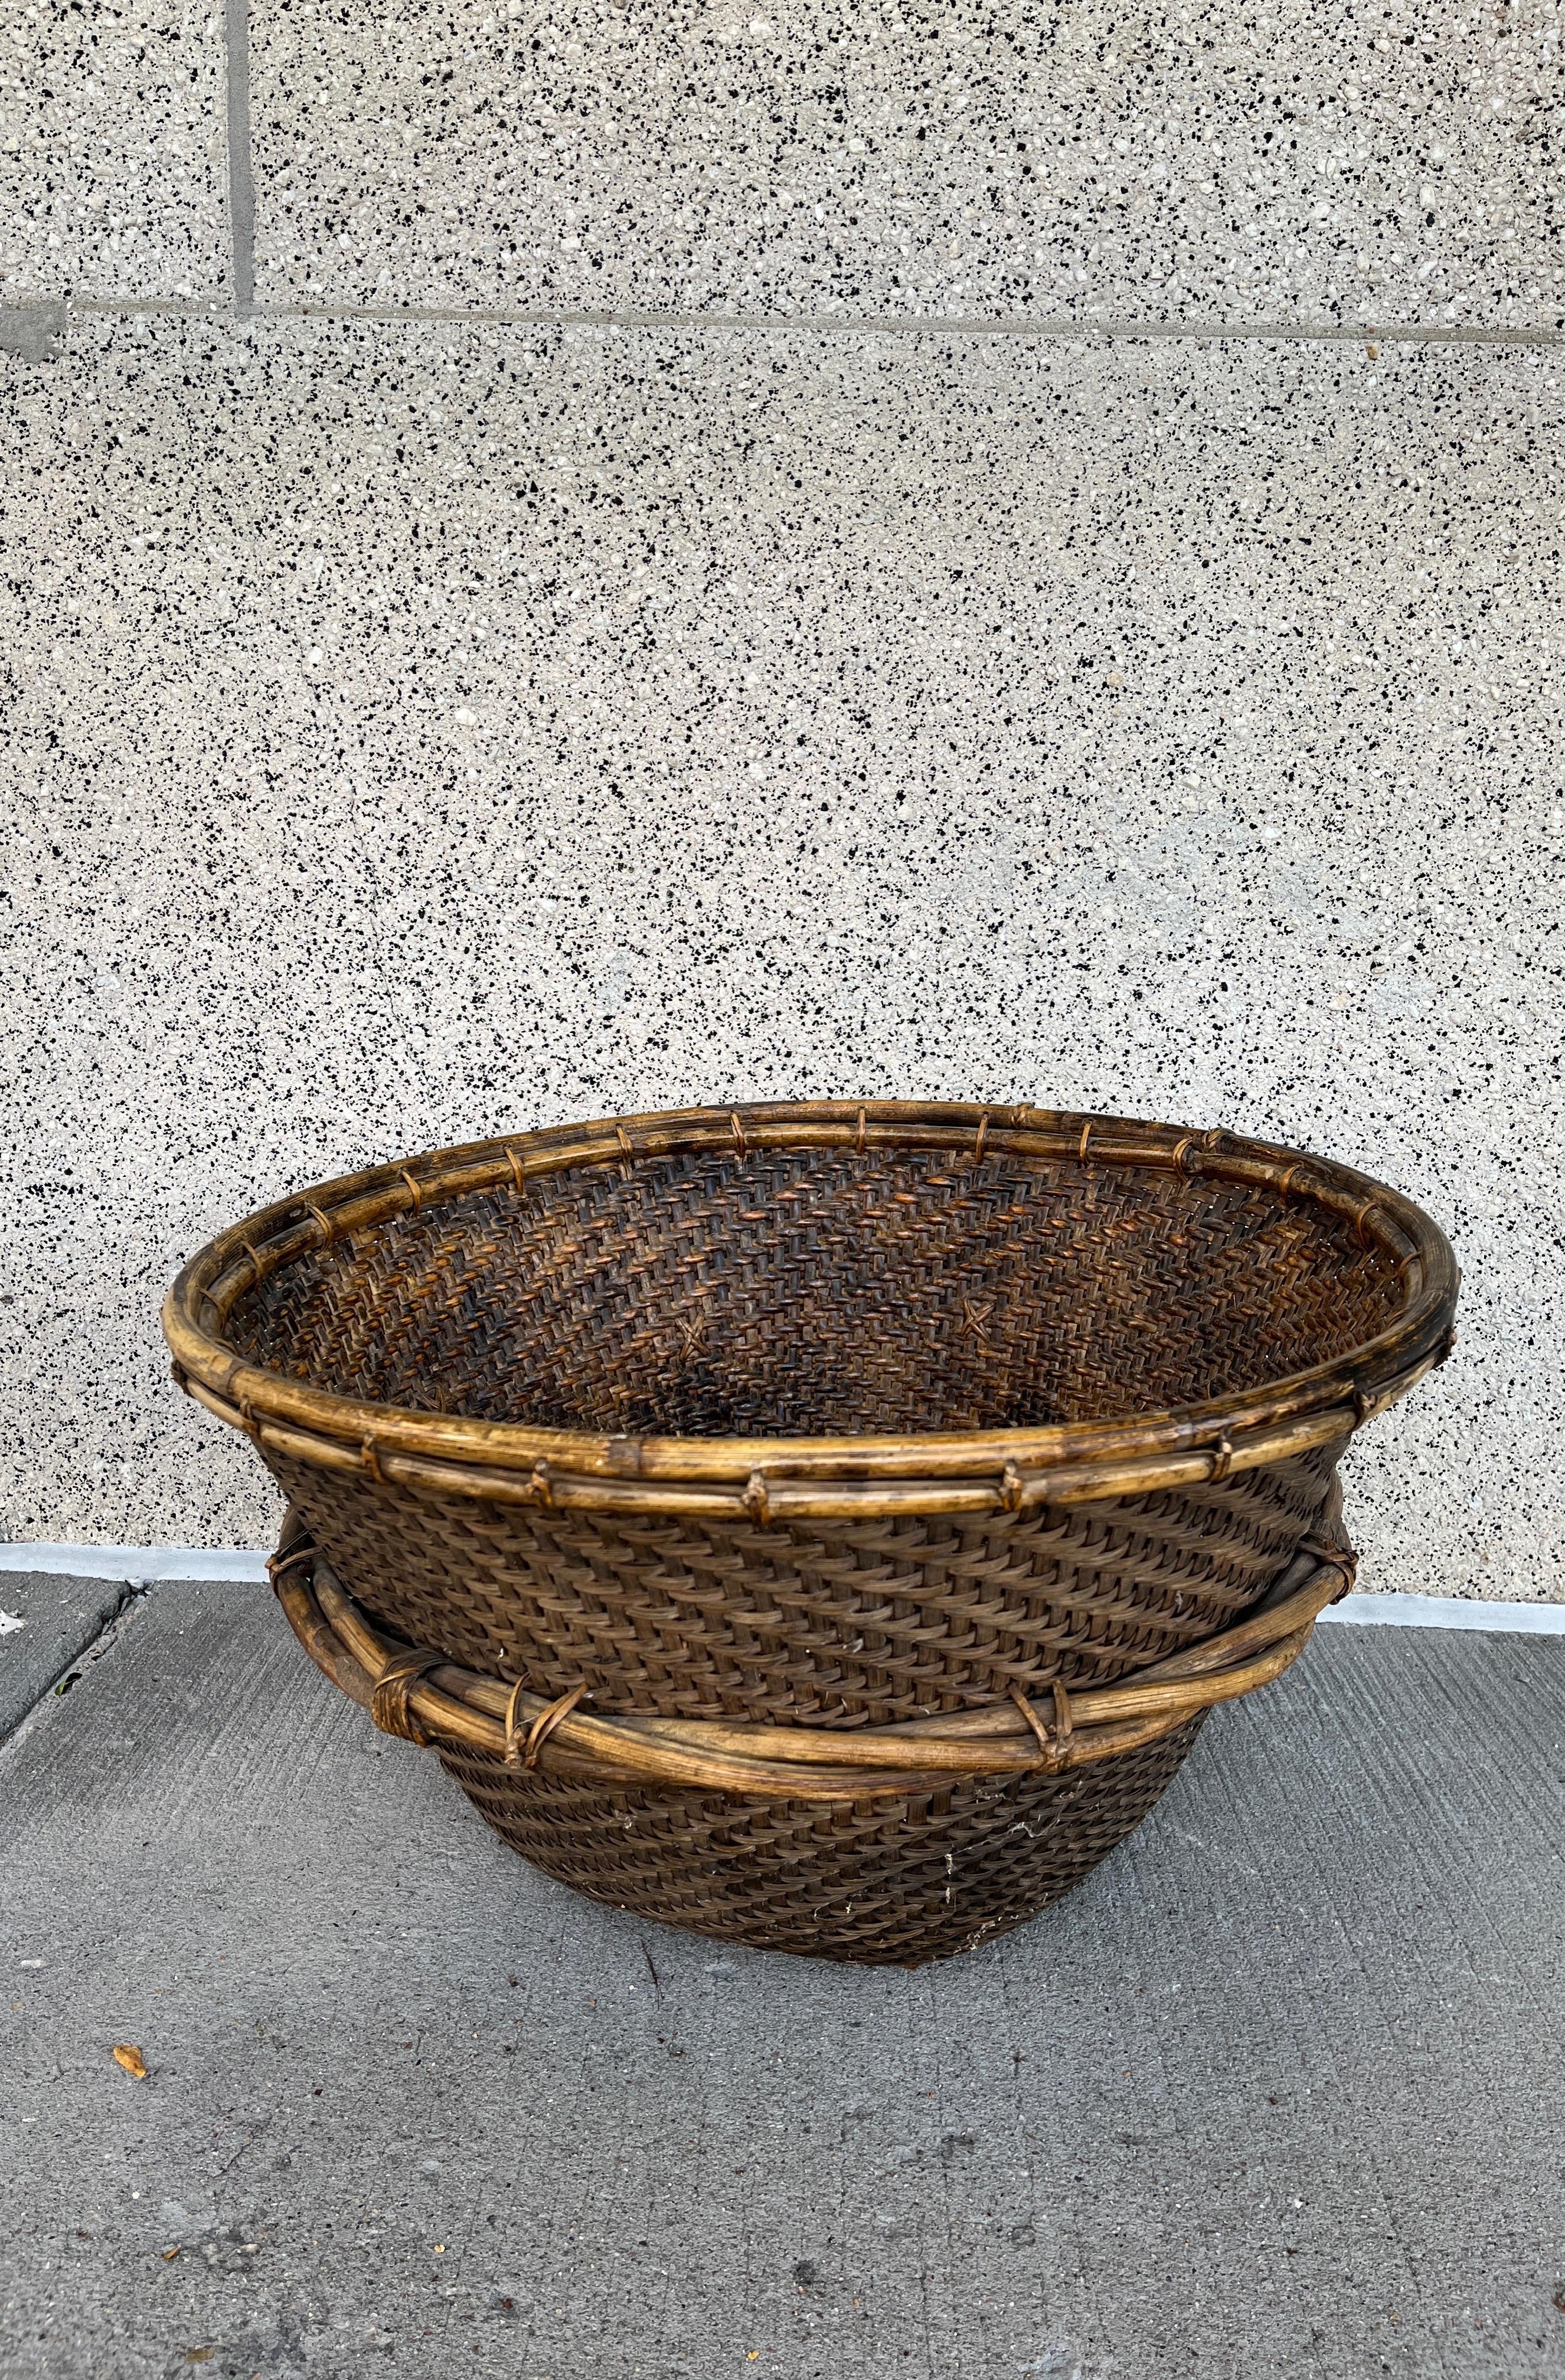 Large Contemporary Woven Basket, Philippines 8